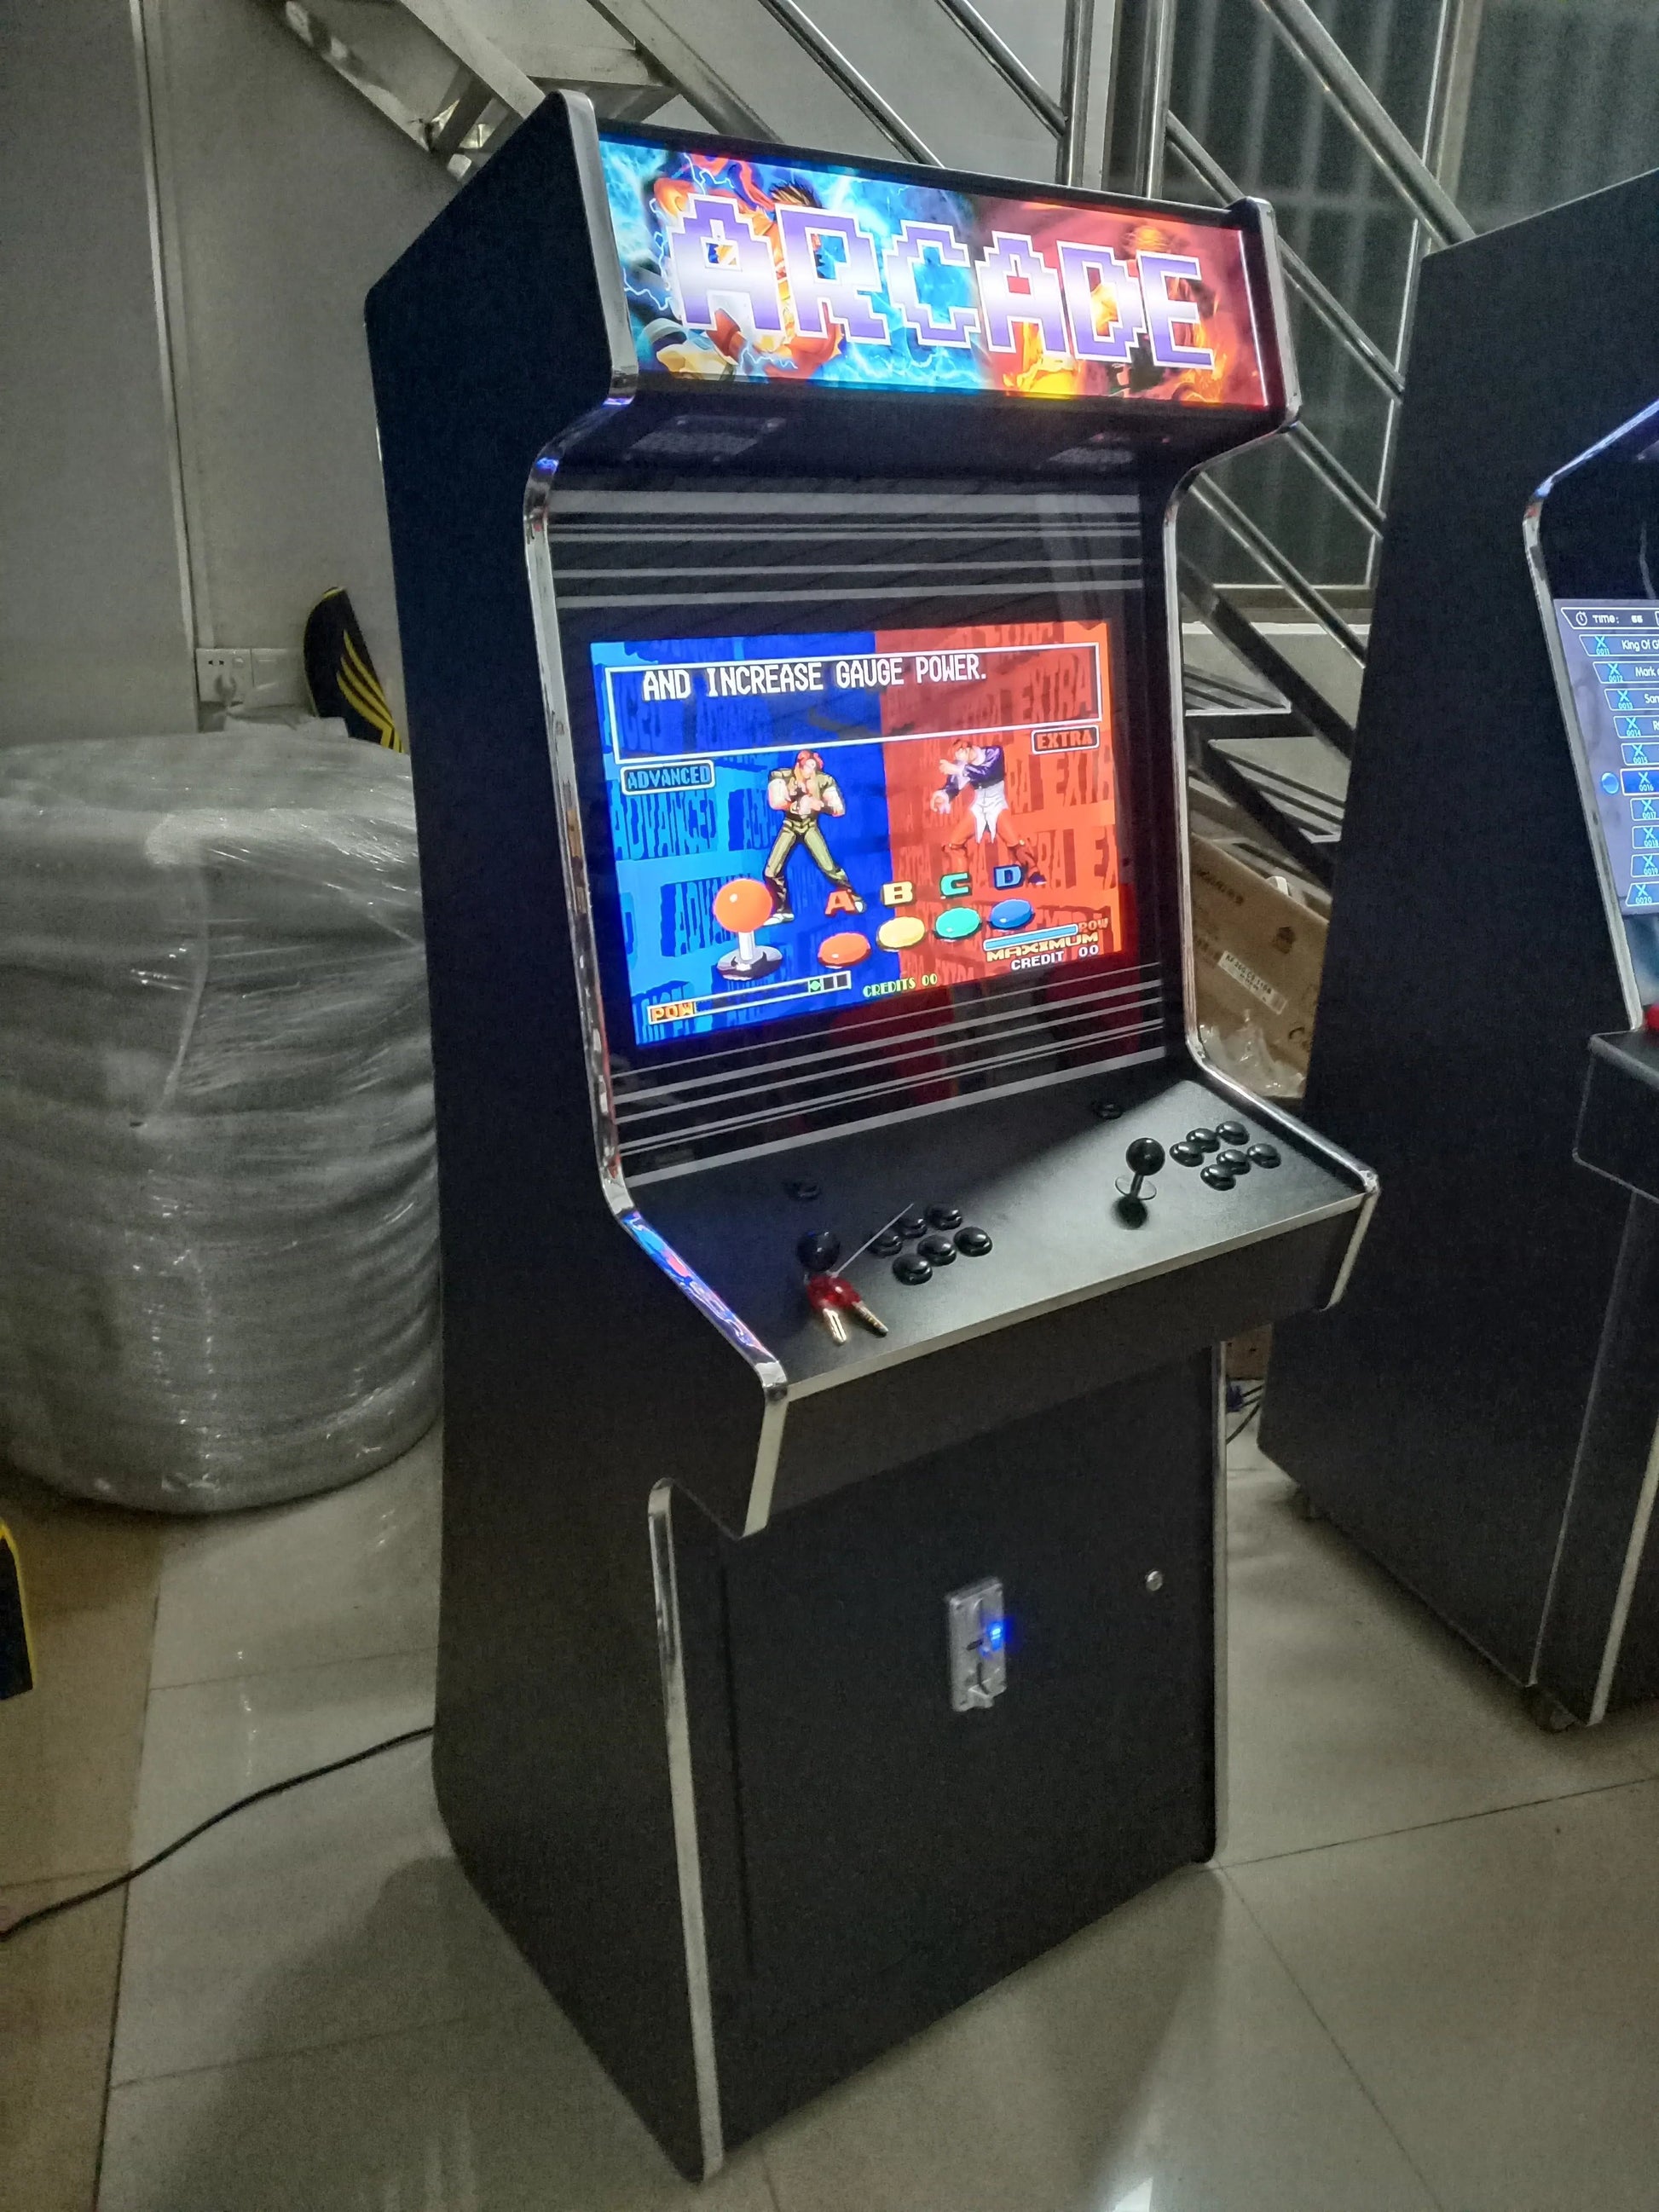 Street-fighter-Arcade-Stand-Wooden-Cabinet-Coin-Operated-Arcade-3188-In-1-pandoras-box-9D-Game-Machine-Tomy-Arcade